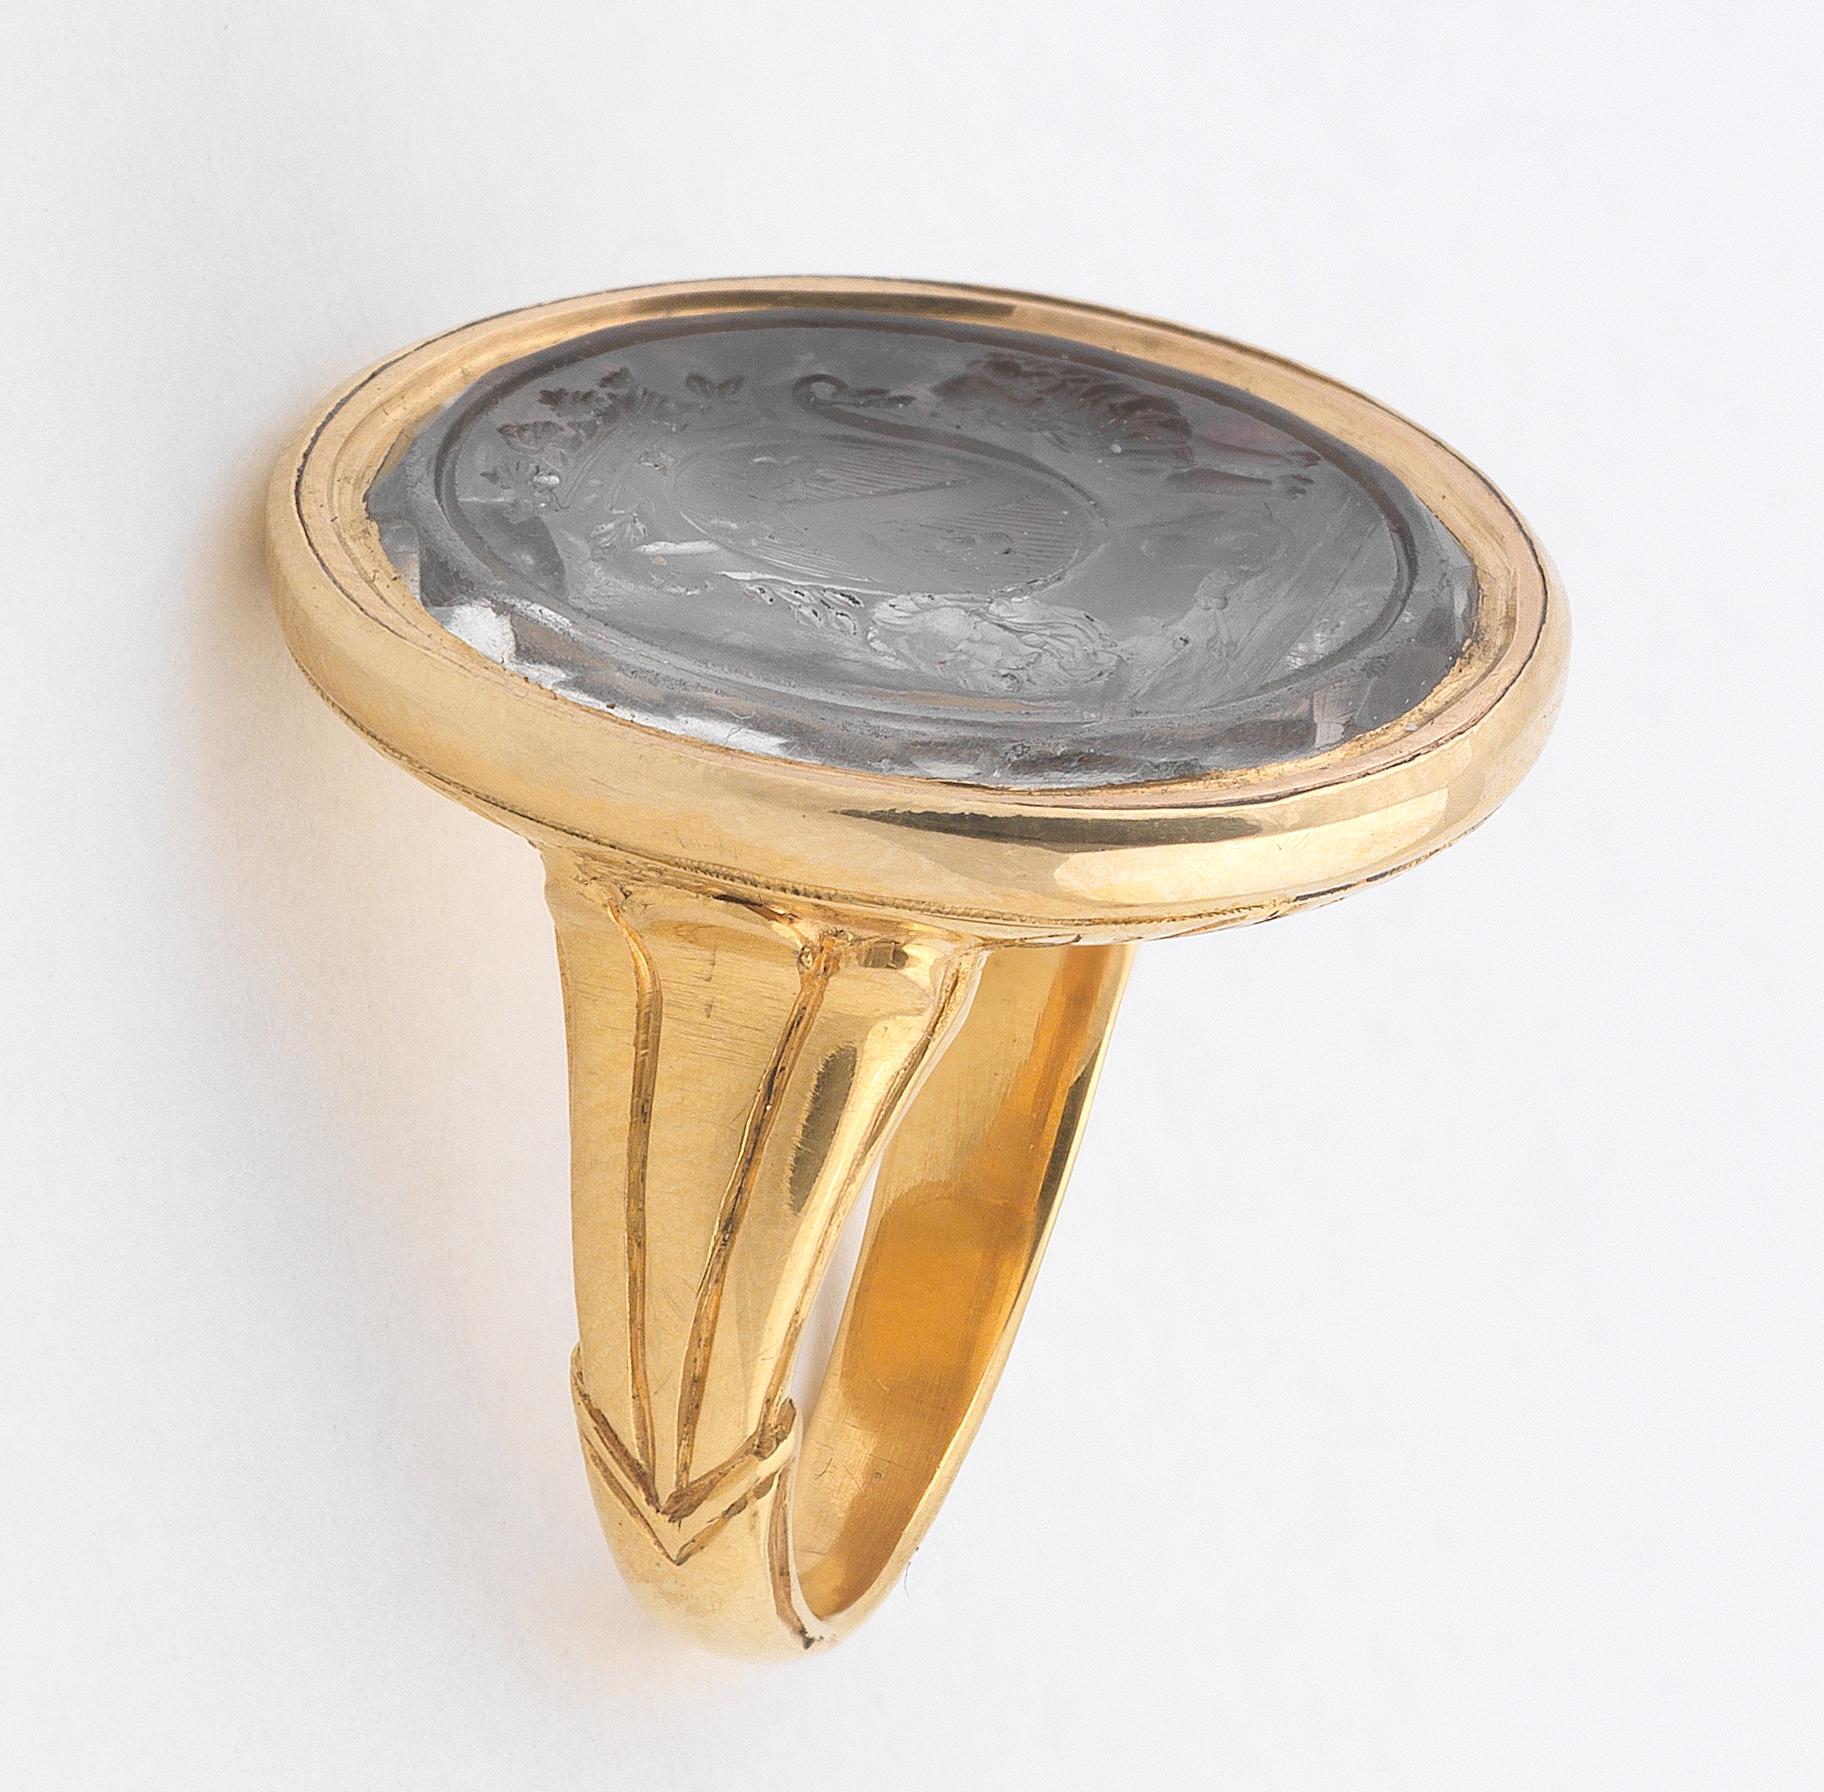 

Oval, depicting a French crest, in a gold mount, ring size 7 , length 25mm, width 21mm
Weight: 15,7gr.